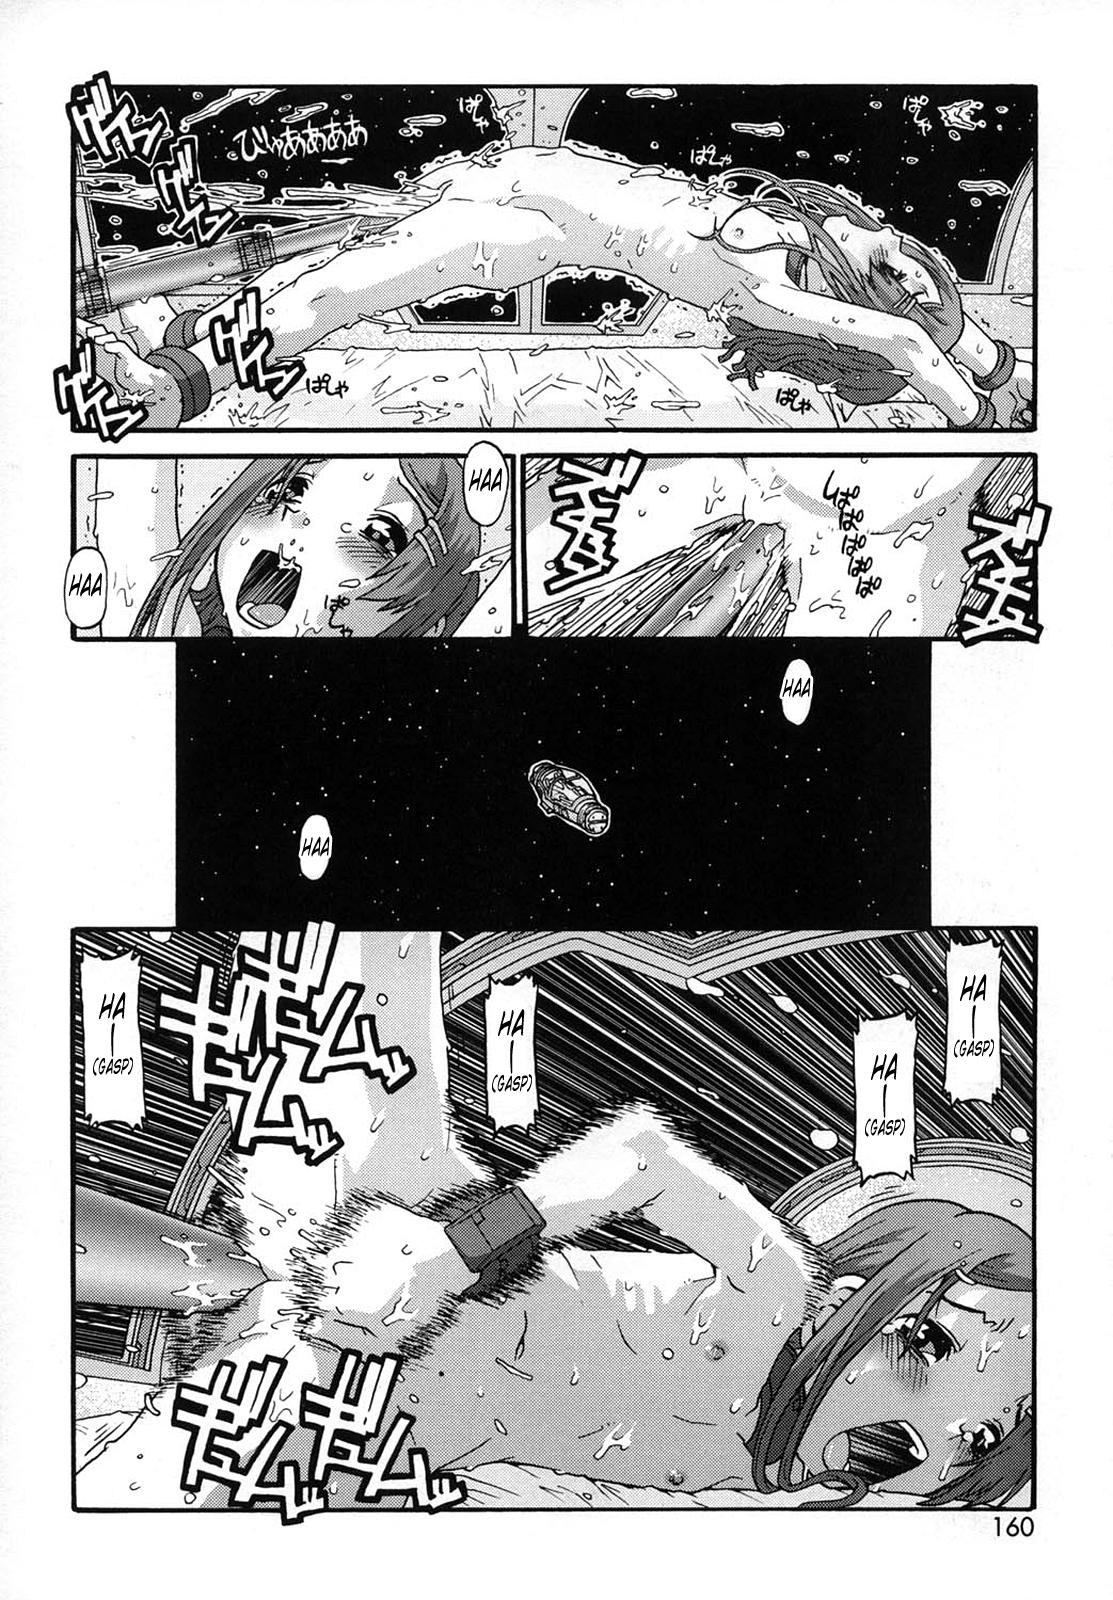 Fuck Her Hard Lifeforms - Ch.10 Lifepod and Lifepod: Arrival Gay Blowjob - Page 10